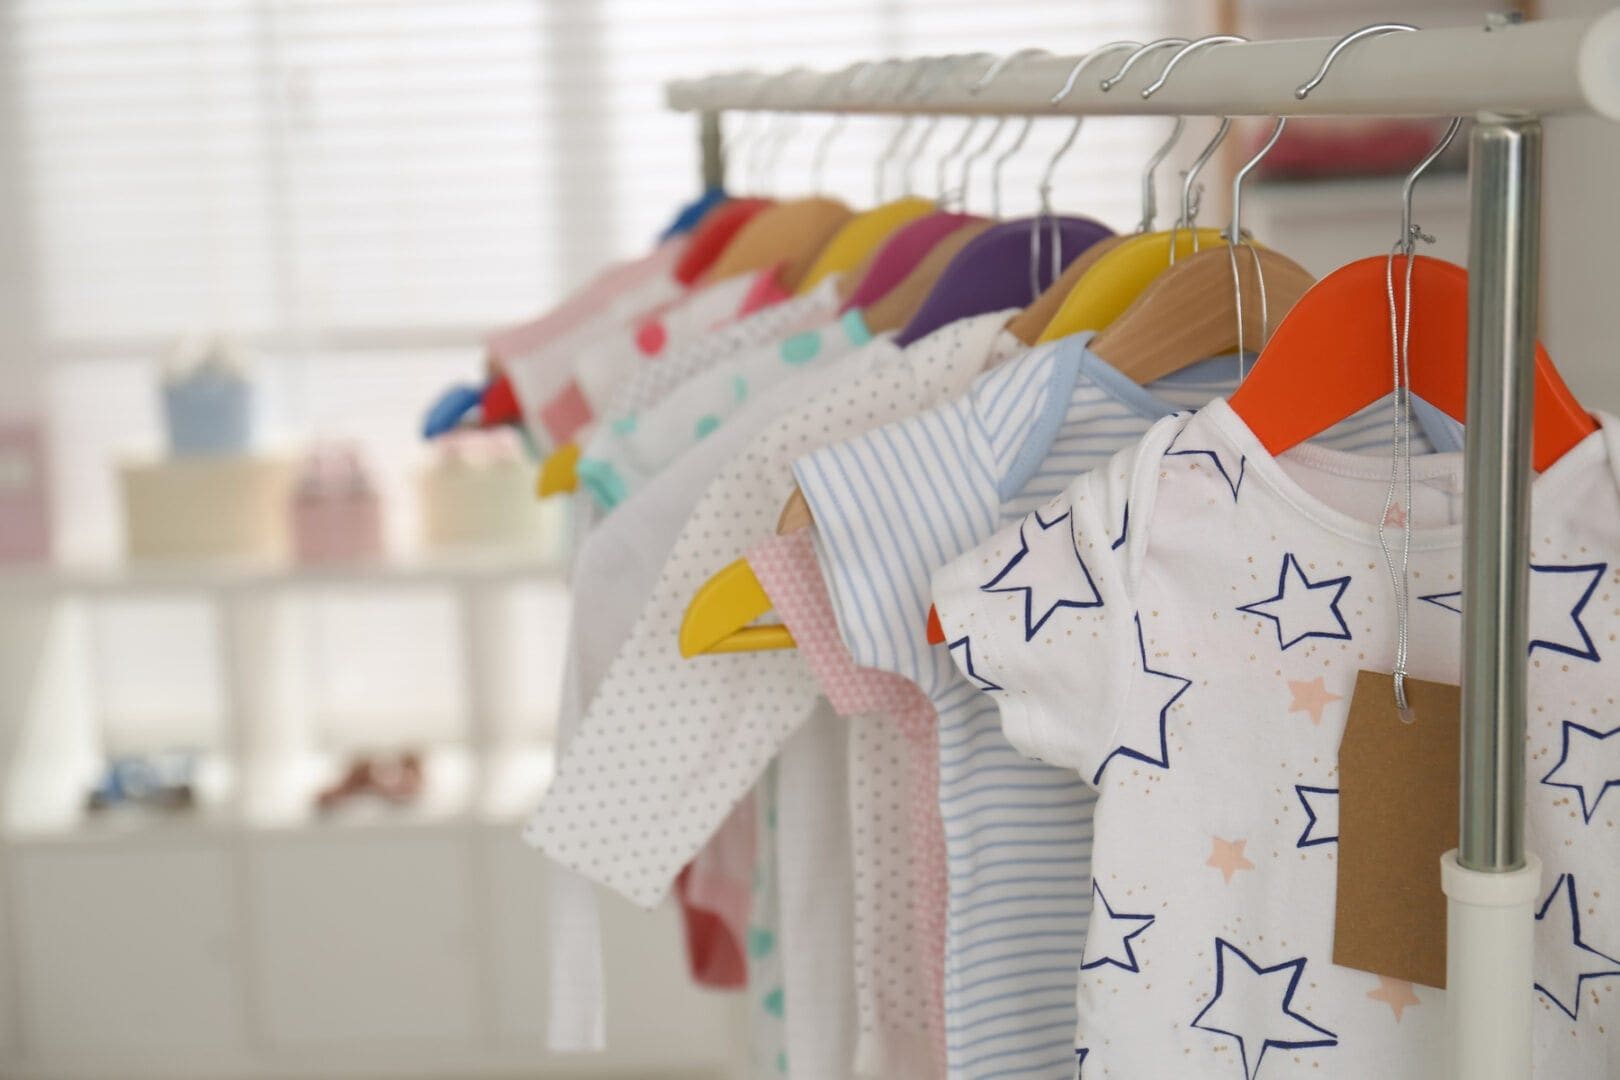 Baby clothing sizes, explained: What you need to know to shop for infants at every size